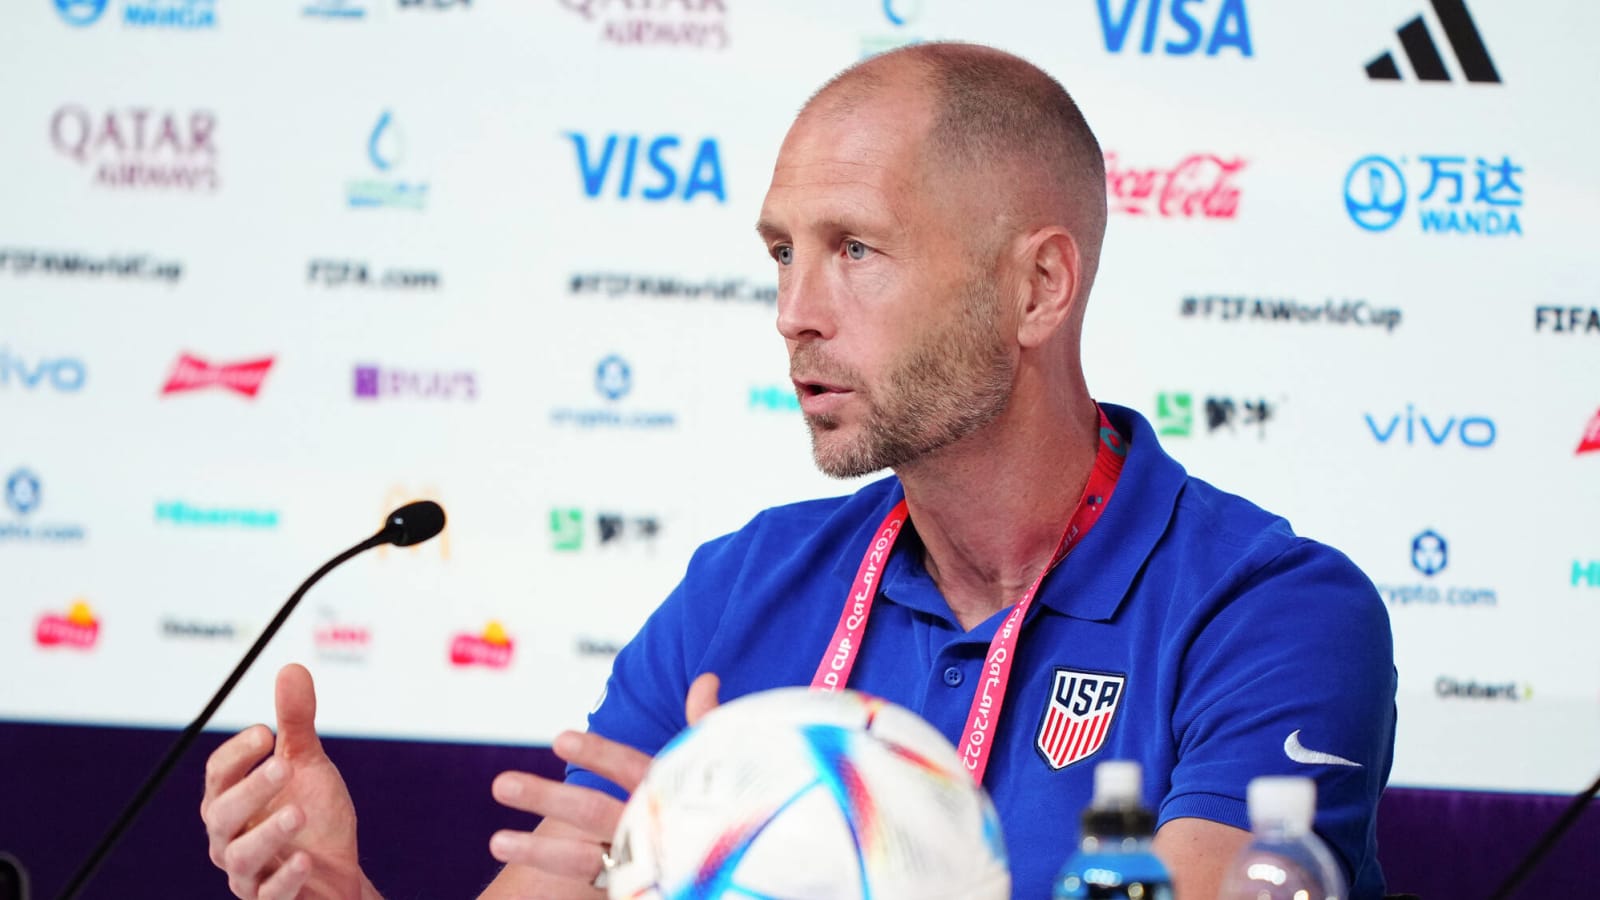 What to know about state of U.S. men's soccer team after hire of 'new' coach